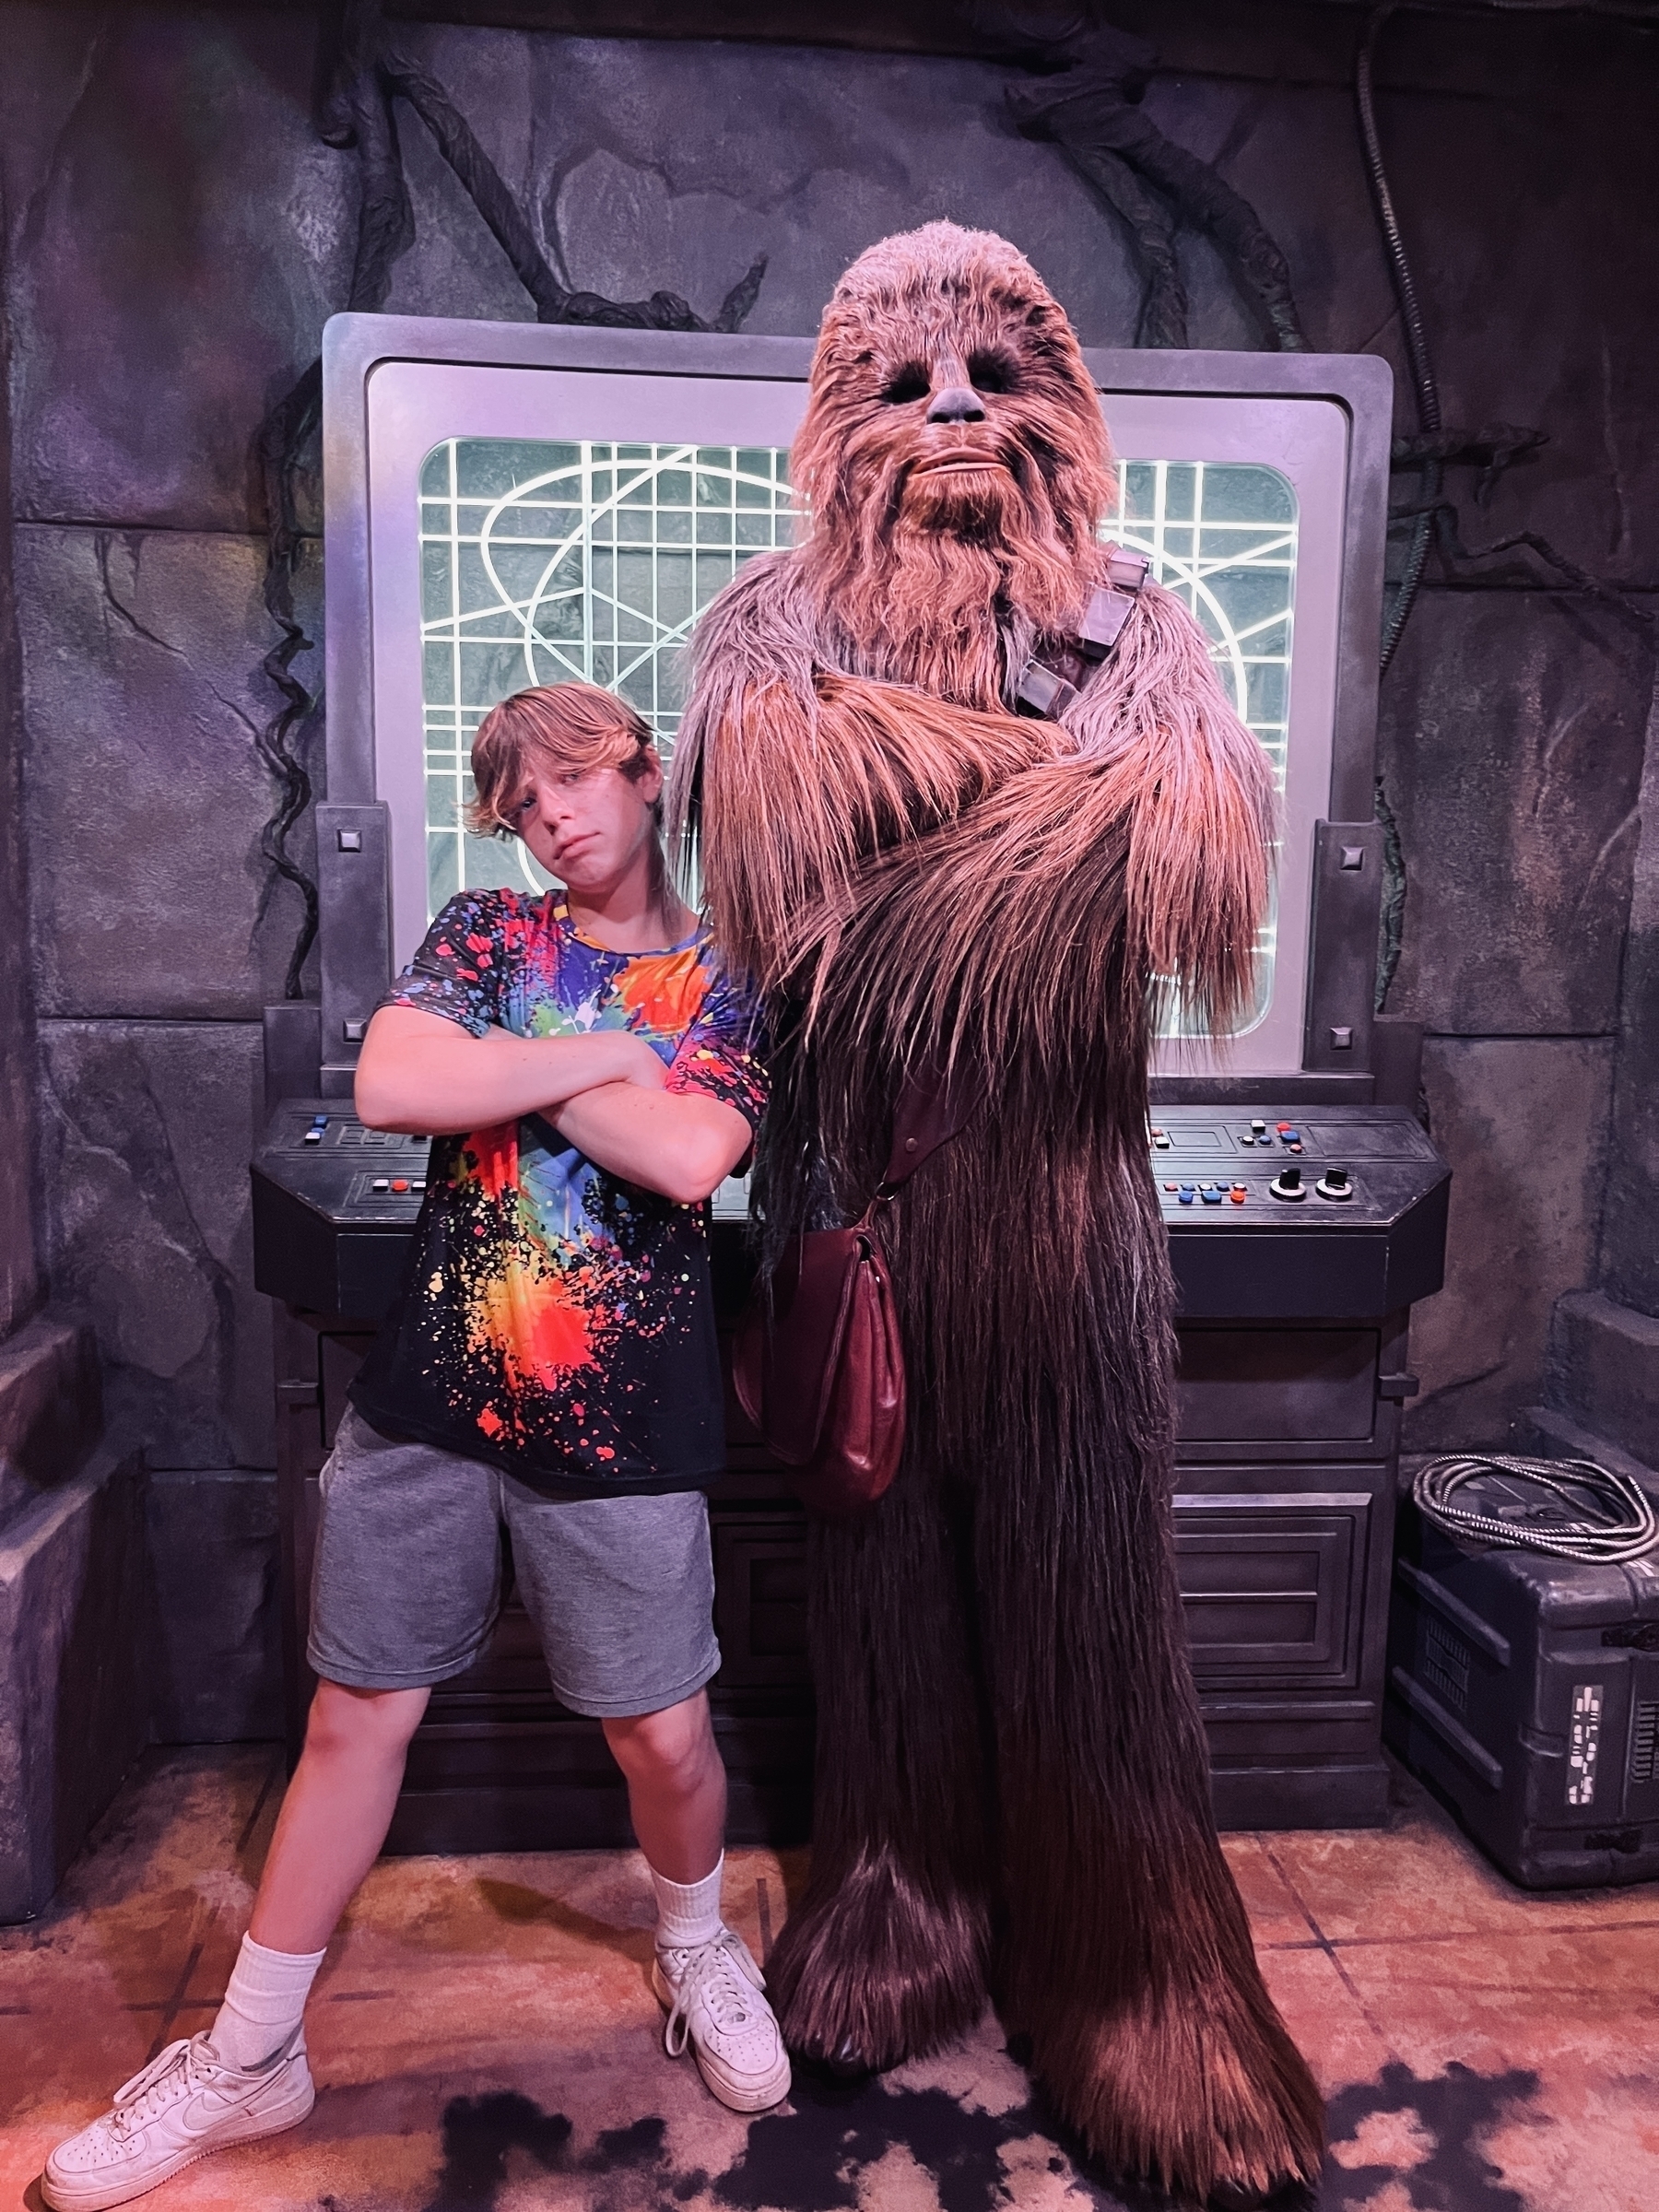 A boy in a bright shirt standing next to Chewbacca Wookiee 